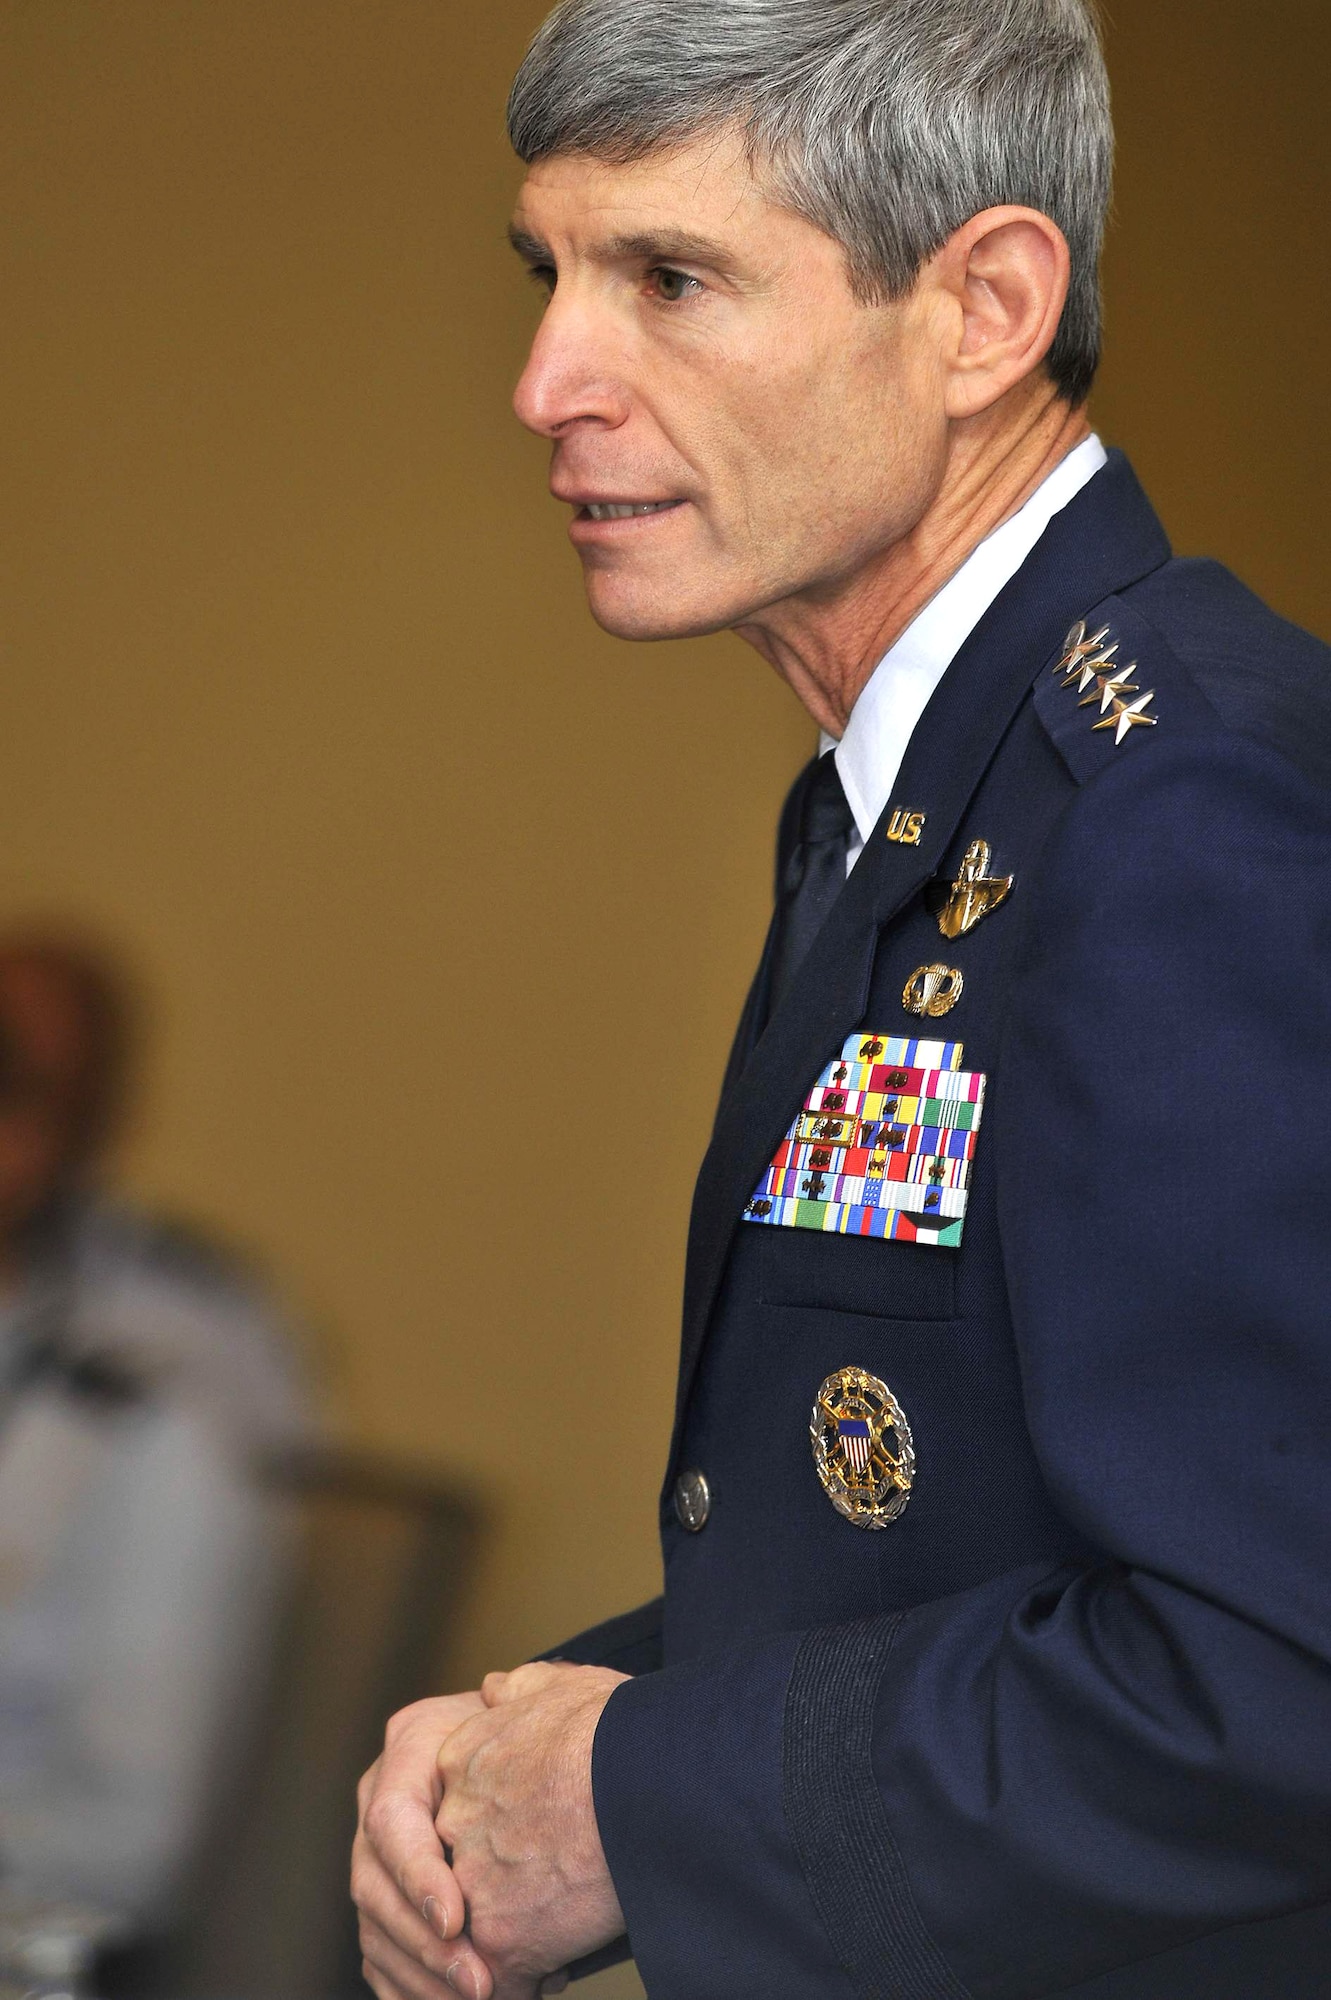 Air Force Chief of Staff Gen. Norton Schwartz speaks at the Sexual Assault Prevention and Response Leader Summit held Nov. 17 and 18 in Alexandria, Va. The chief and Secretary of the Air Force Michael B. Donley challenged attendees-including Air Force leaders from major commands and wings throughout the Air Force-to make a commitment to eliminating sexual assault in the Air Force. (U.S. Air Force photo/Scott Ash) 